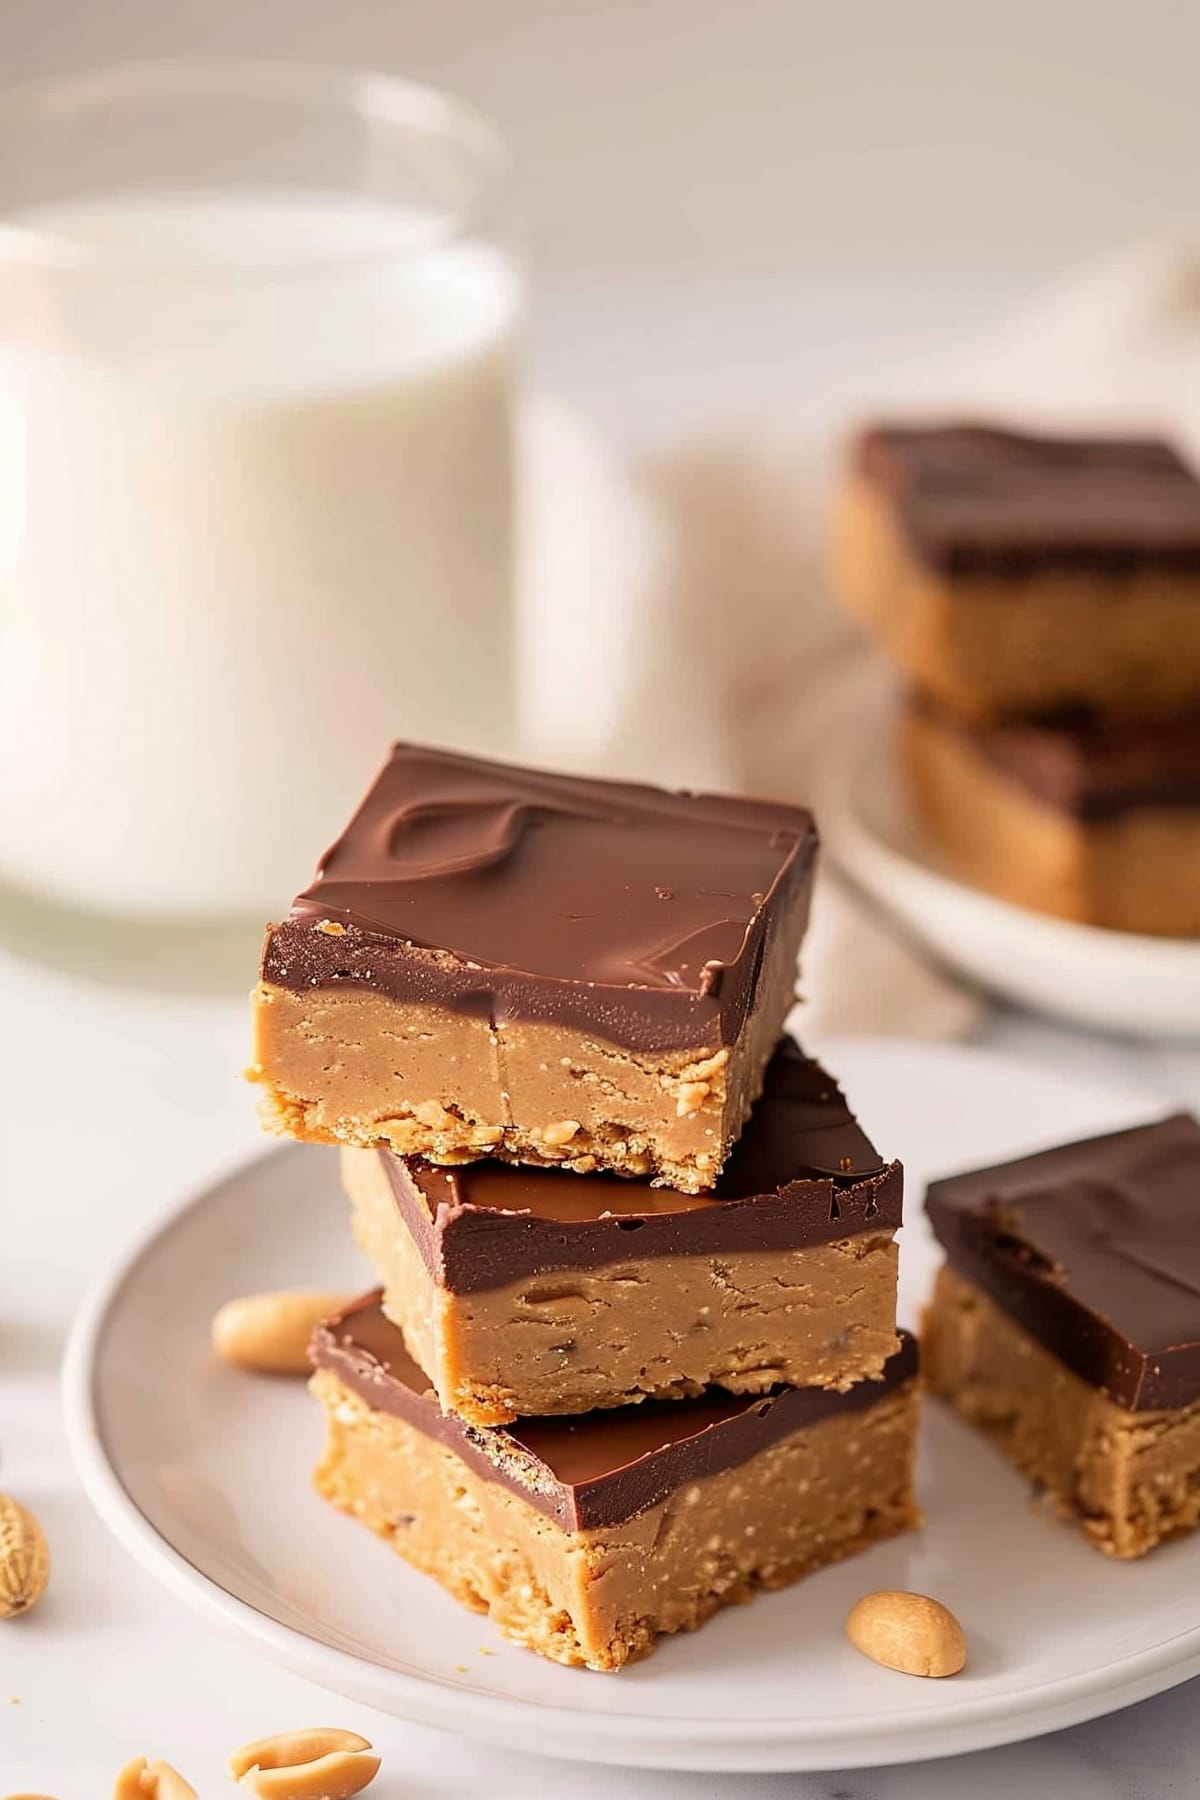 Homemade peanut butter bars with a glass of milk